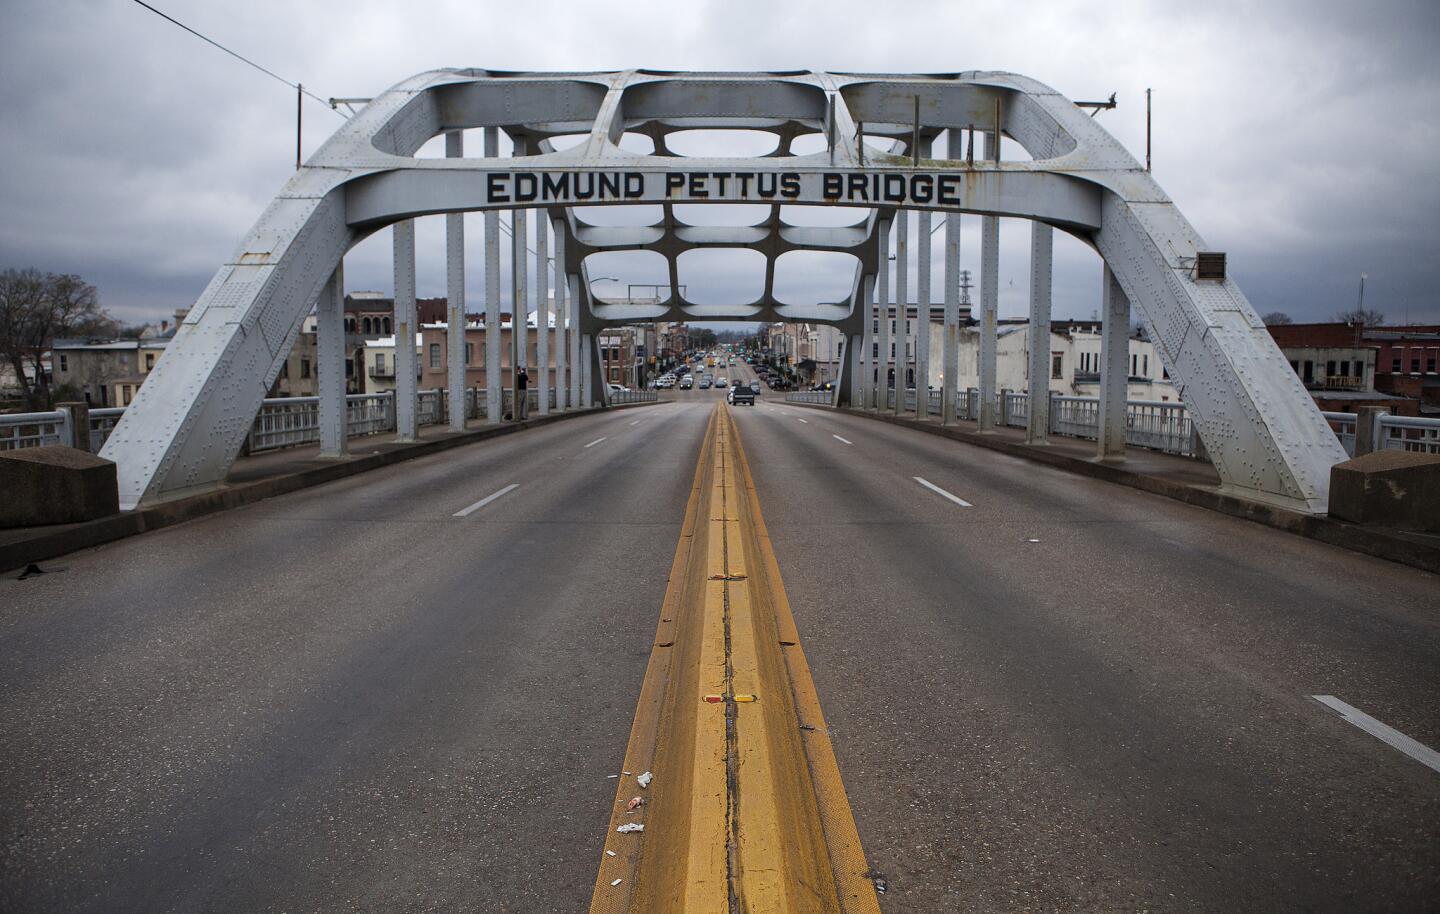 The Edmund Pettus Bridge became a symbol of the civil rights movement after voting rights marchers were beaten by Alabama state troopers on March 7, 1965. The day became known as Bloody Sunday.